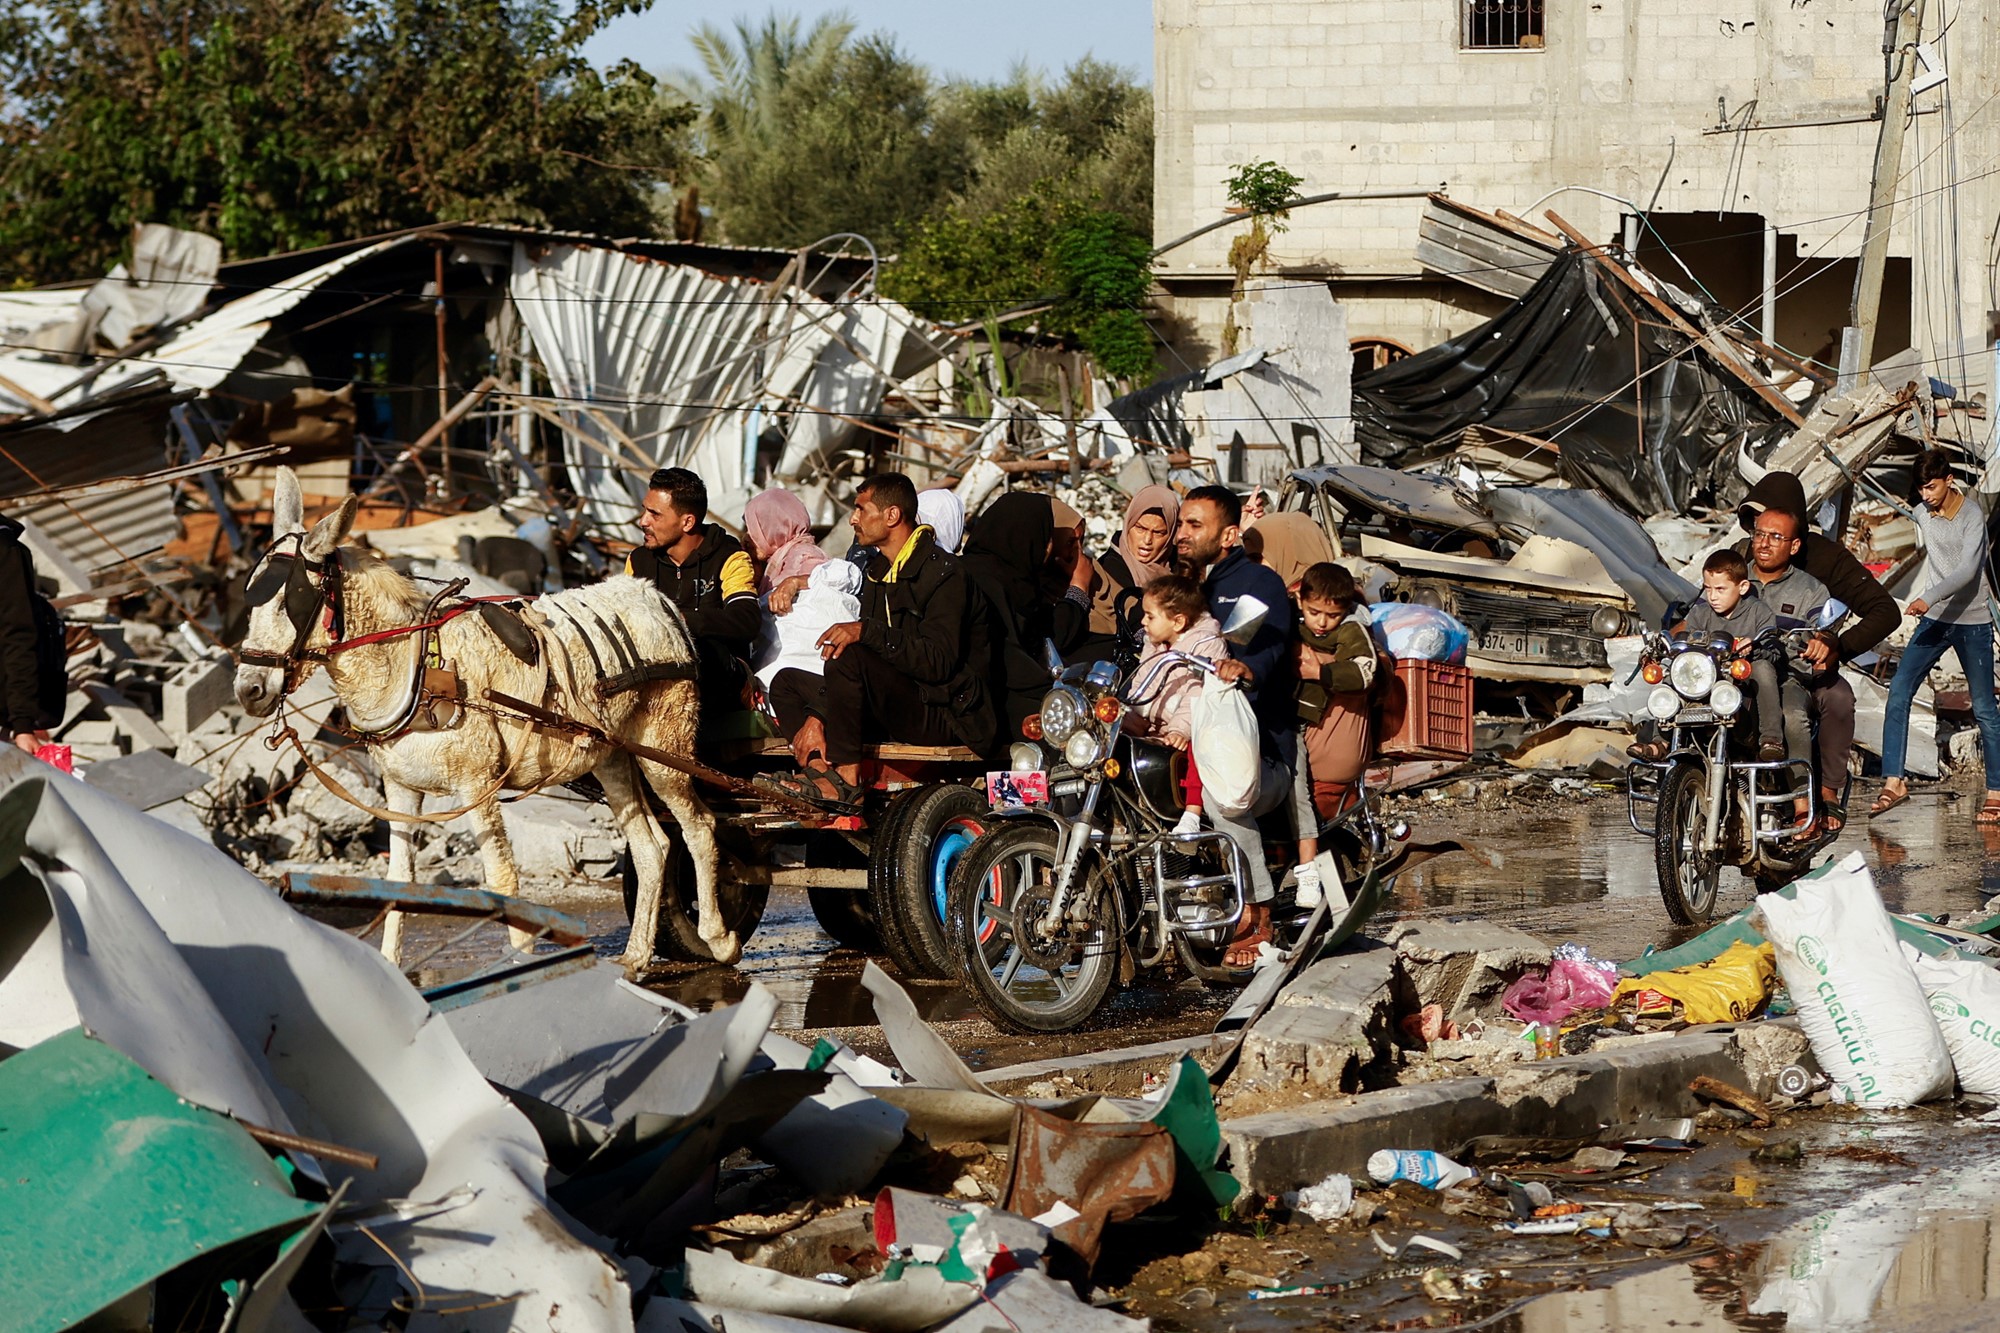 A group of people sits on a donkey cart as it moves through an area with destroyed buildings.